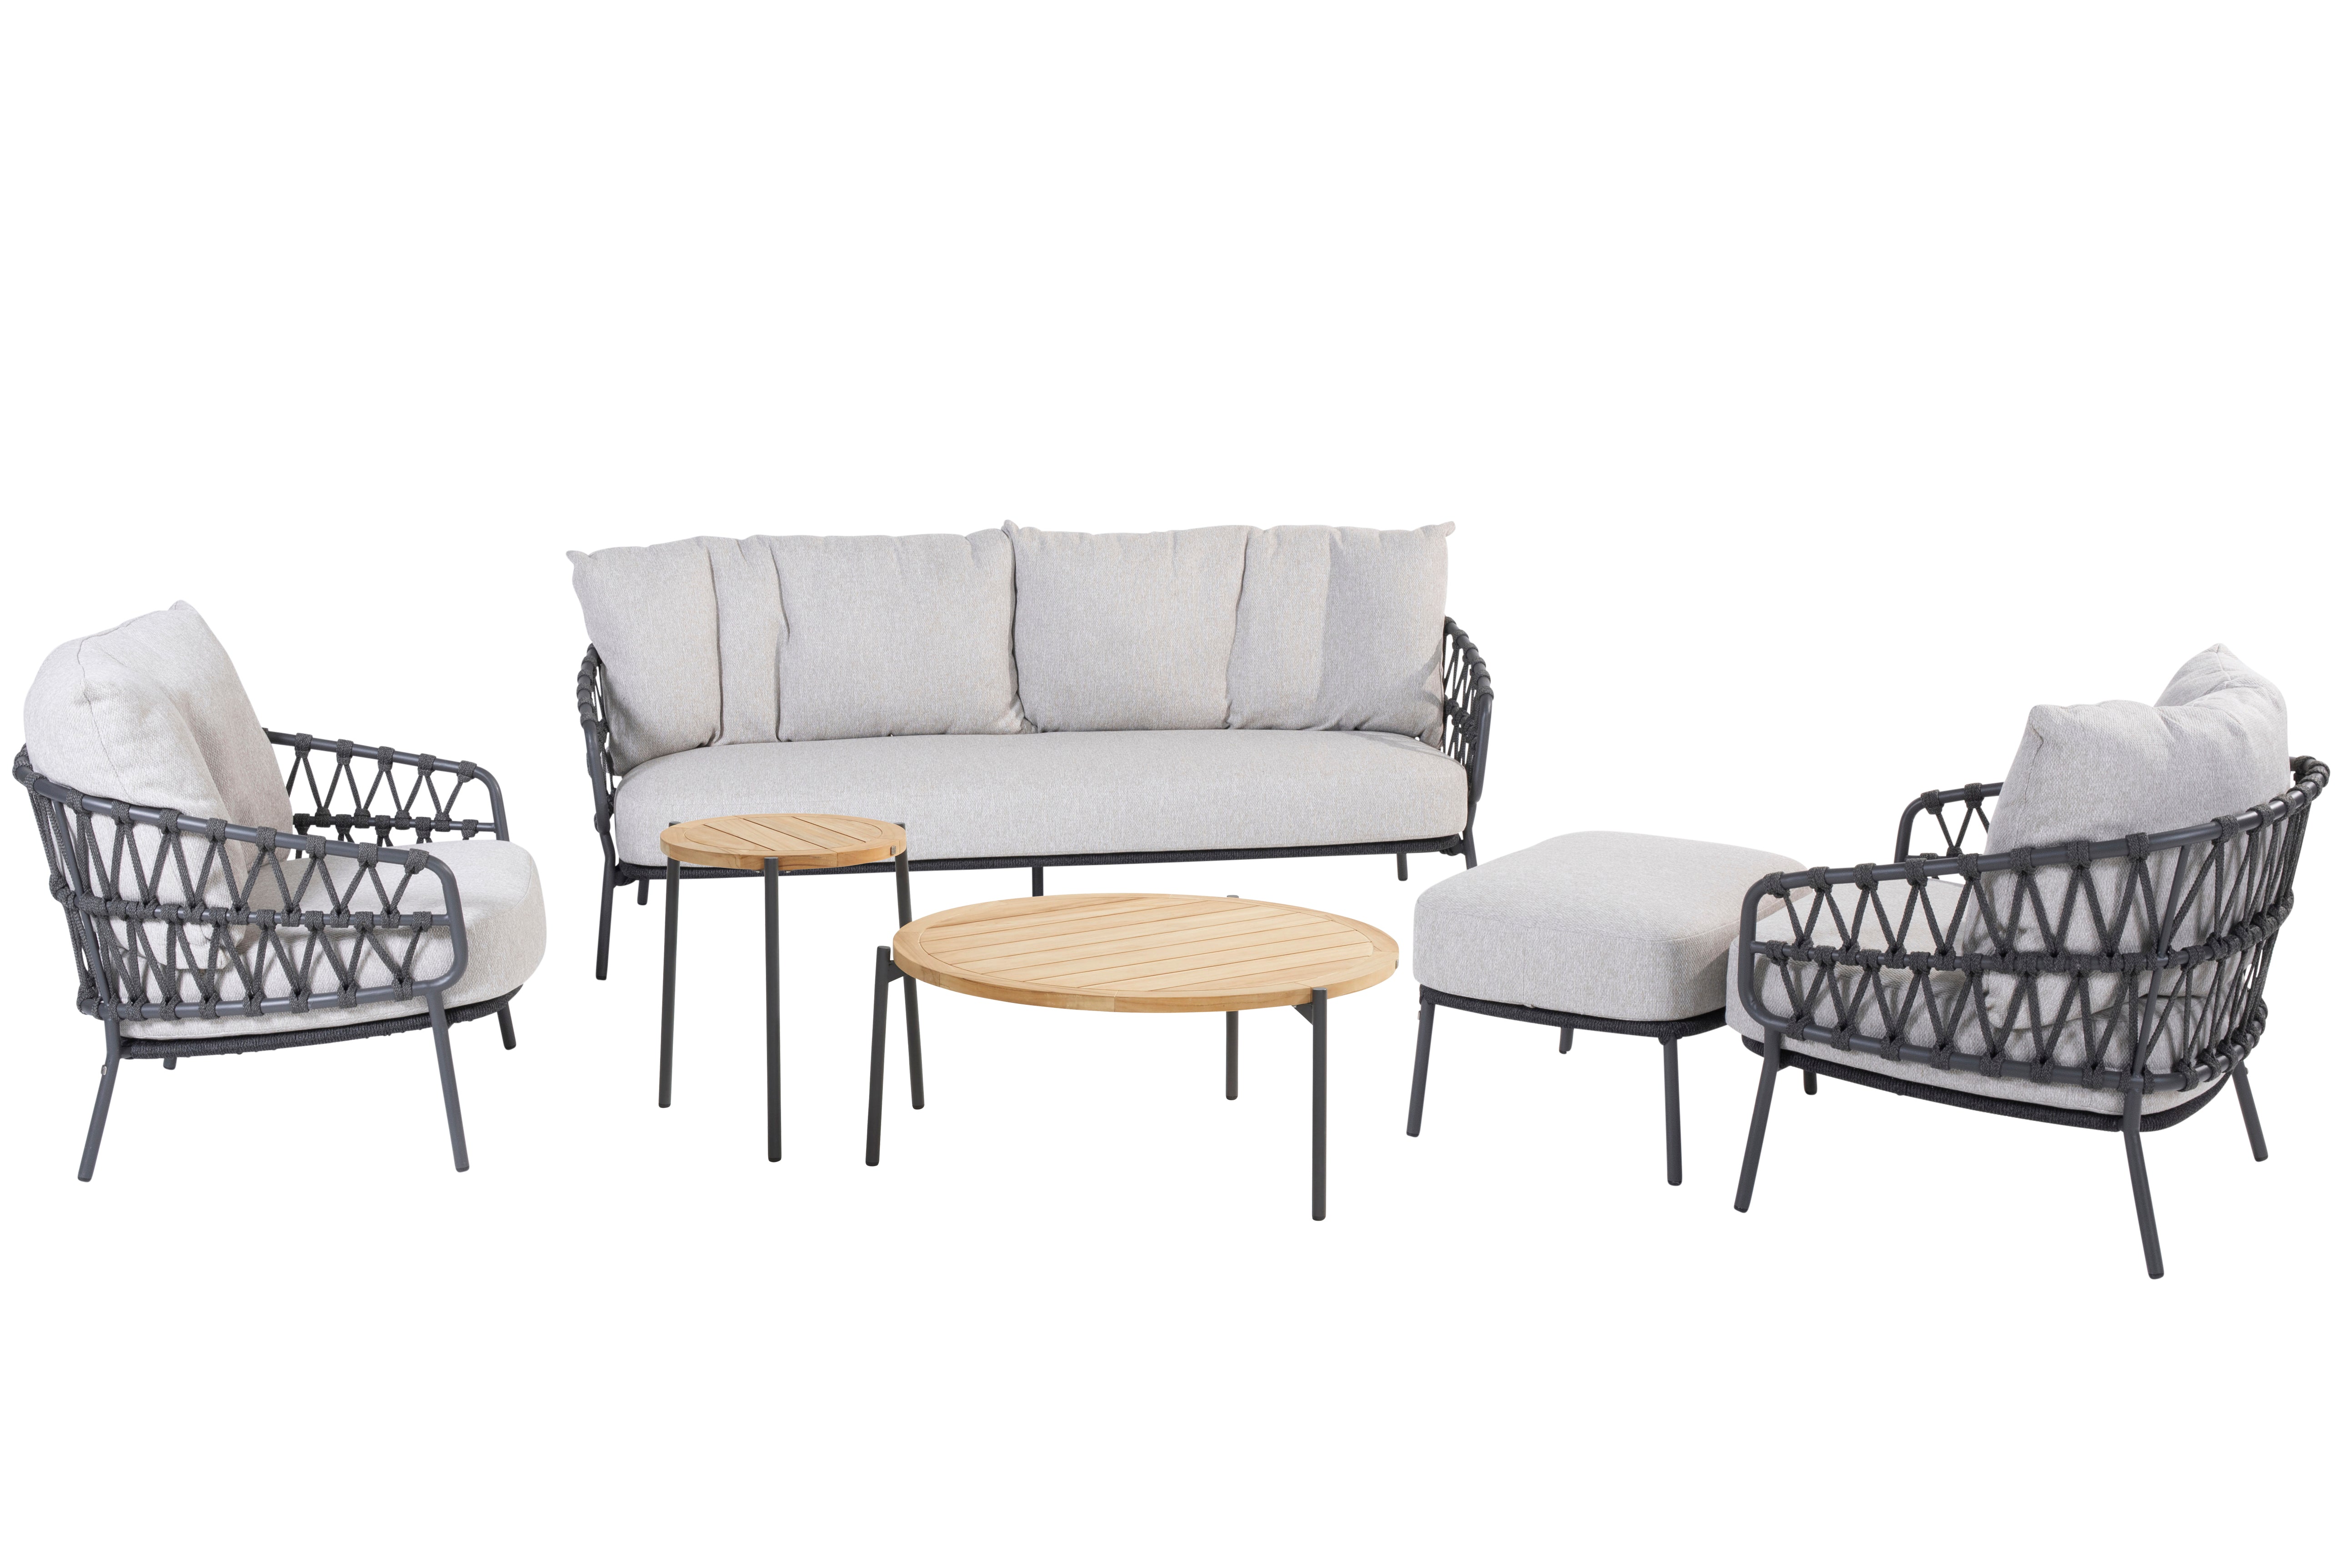 4 Seasons Outdoor Calpi Lounge With Footstool Set